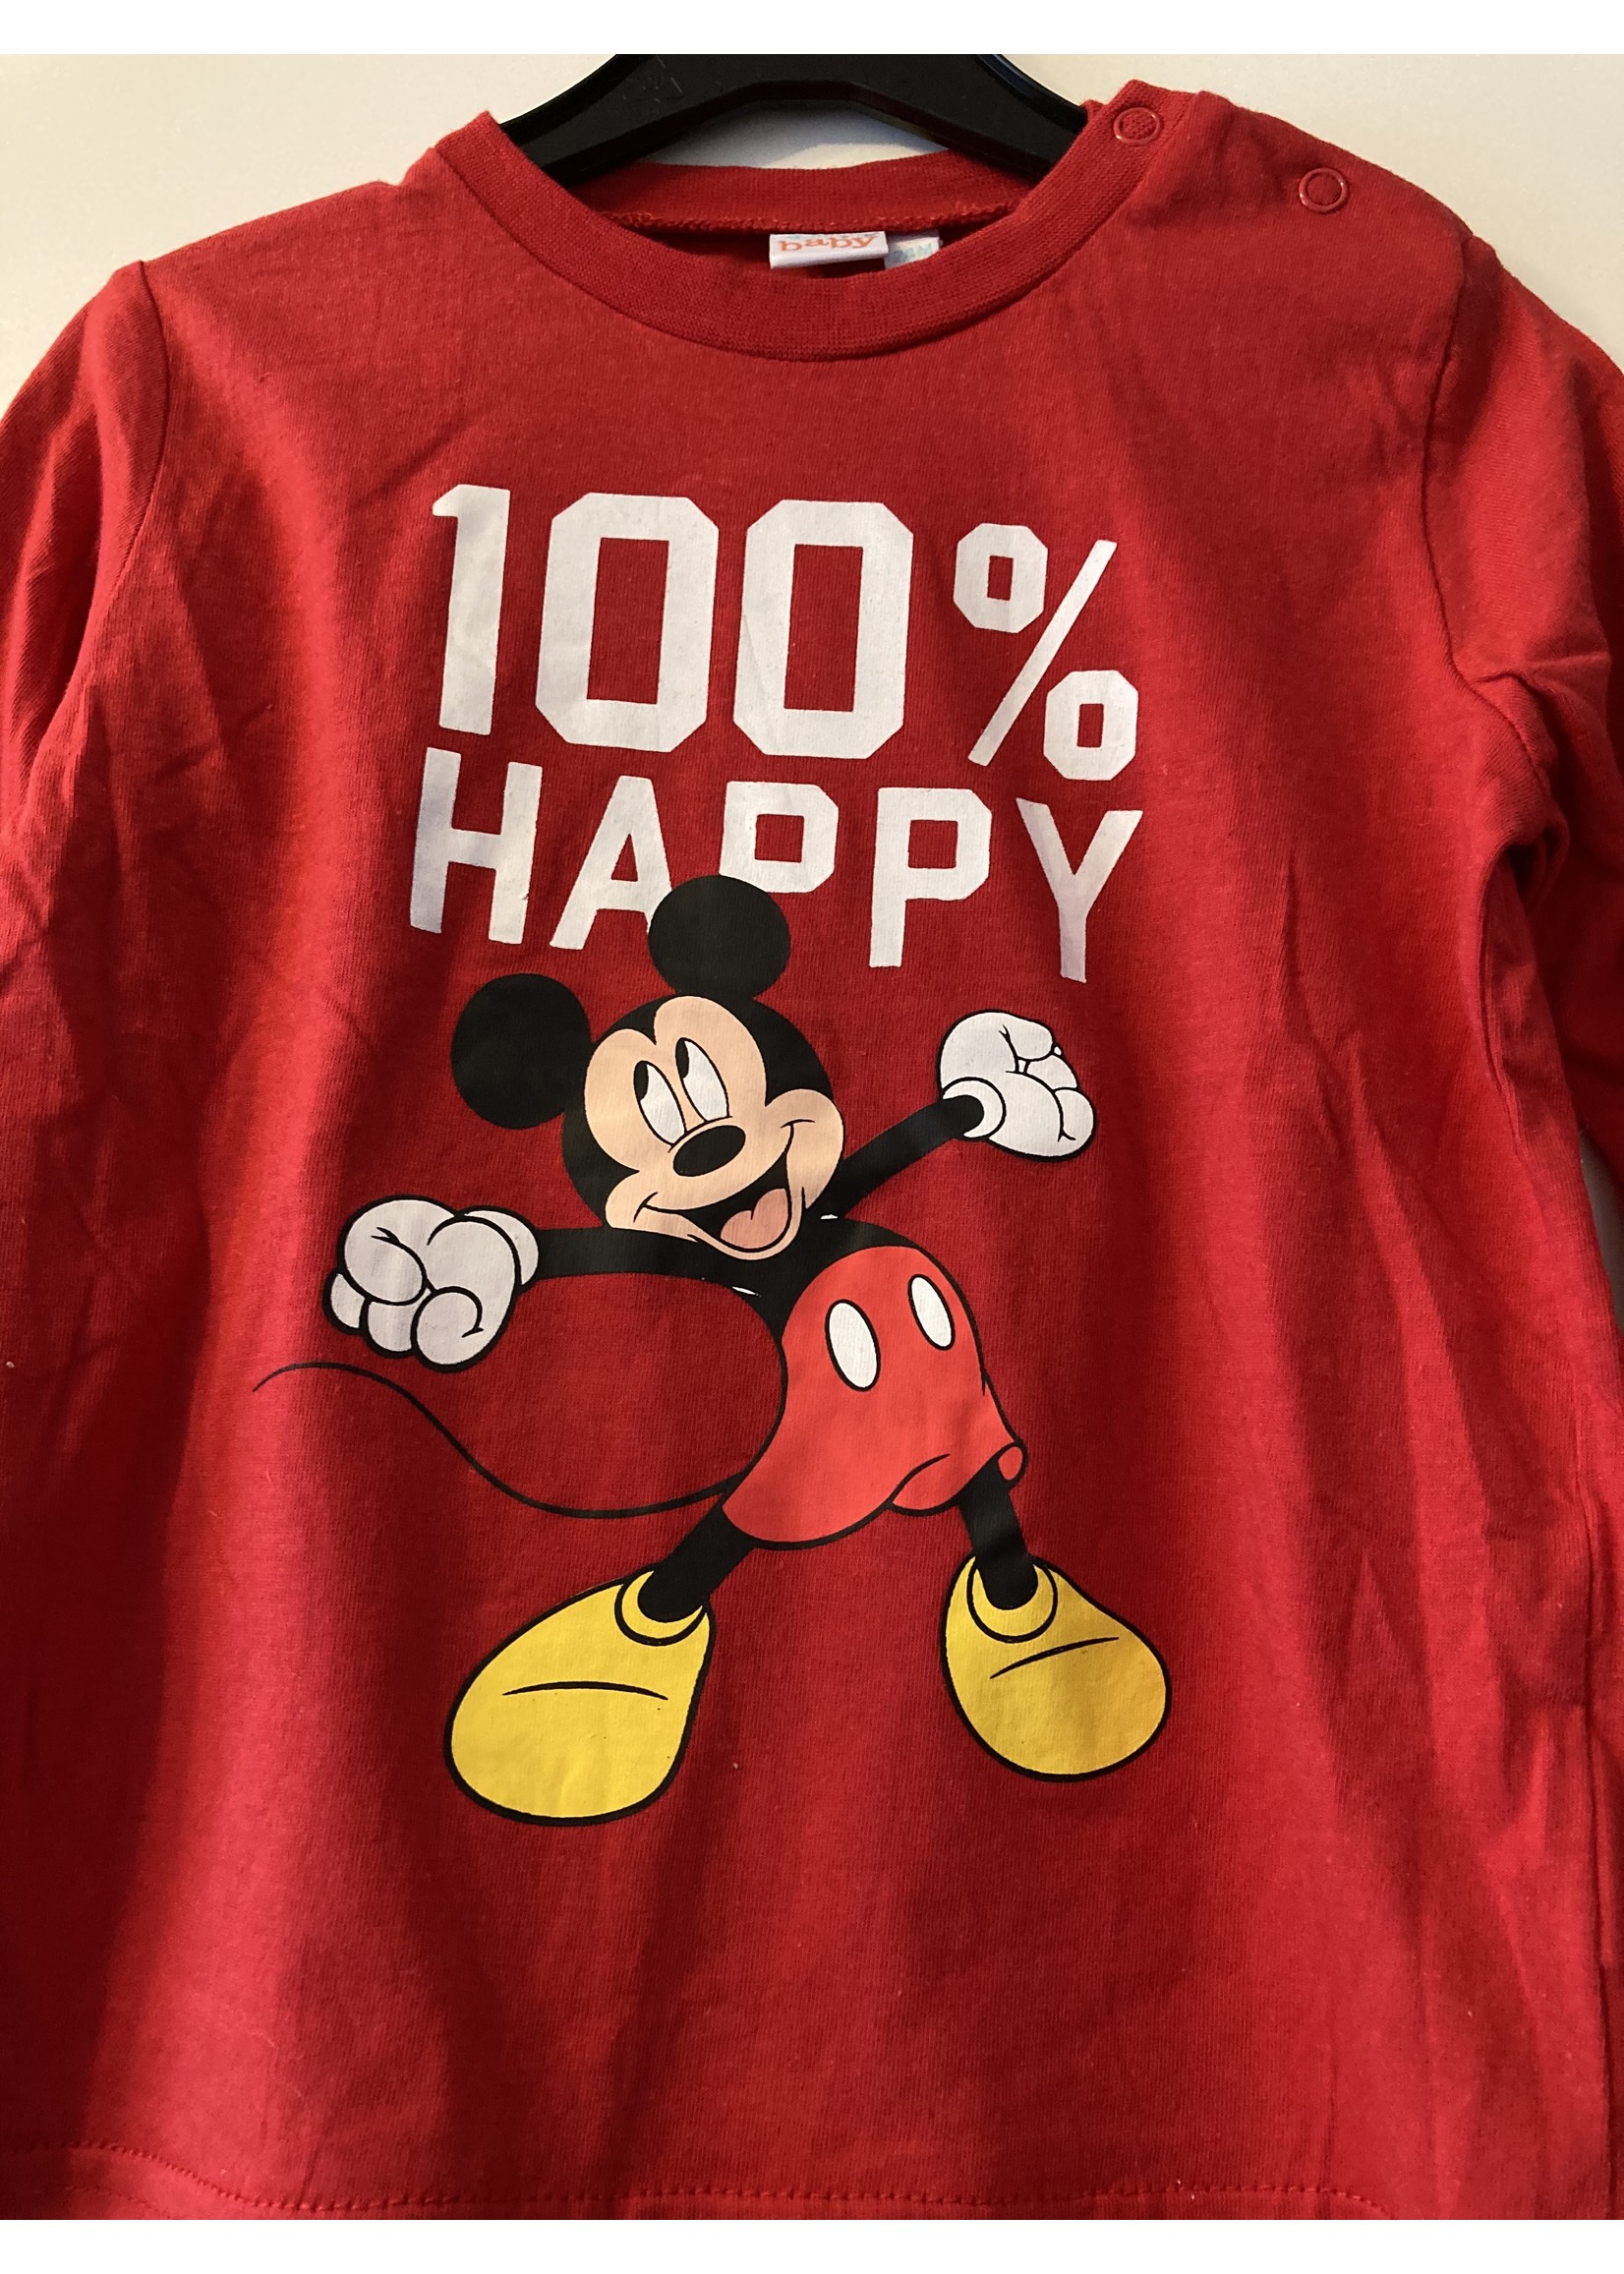 Disney baby Mickey Mouse long sleeve from Disney baby red